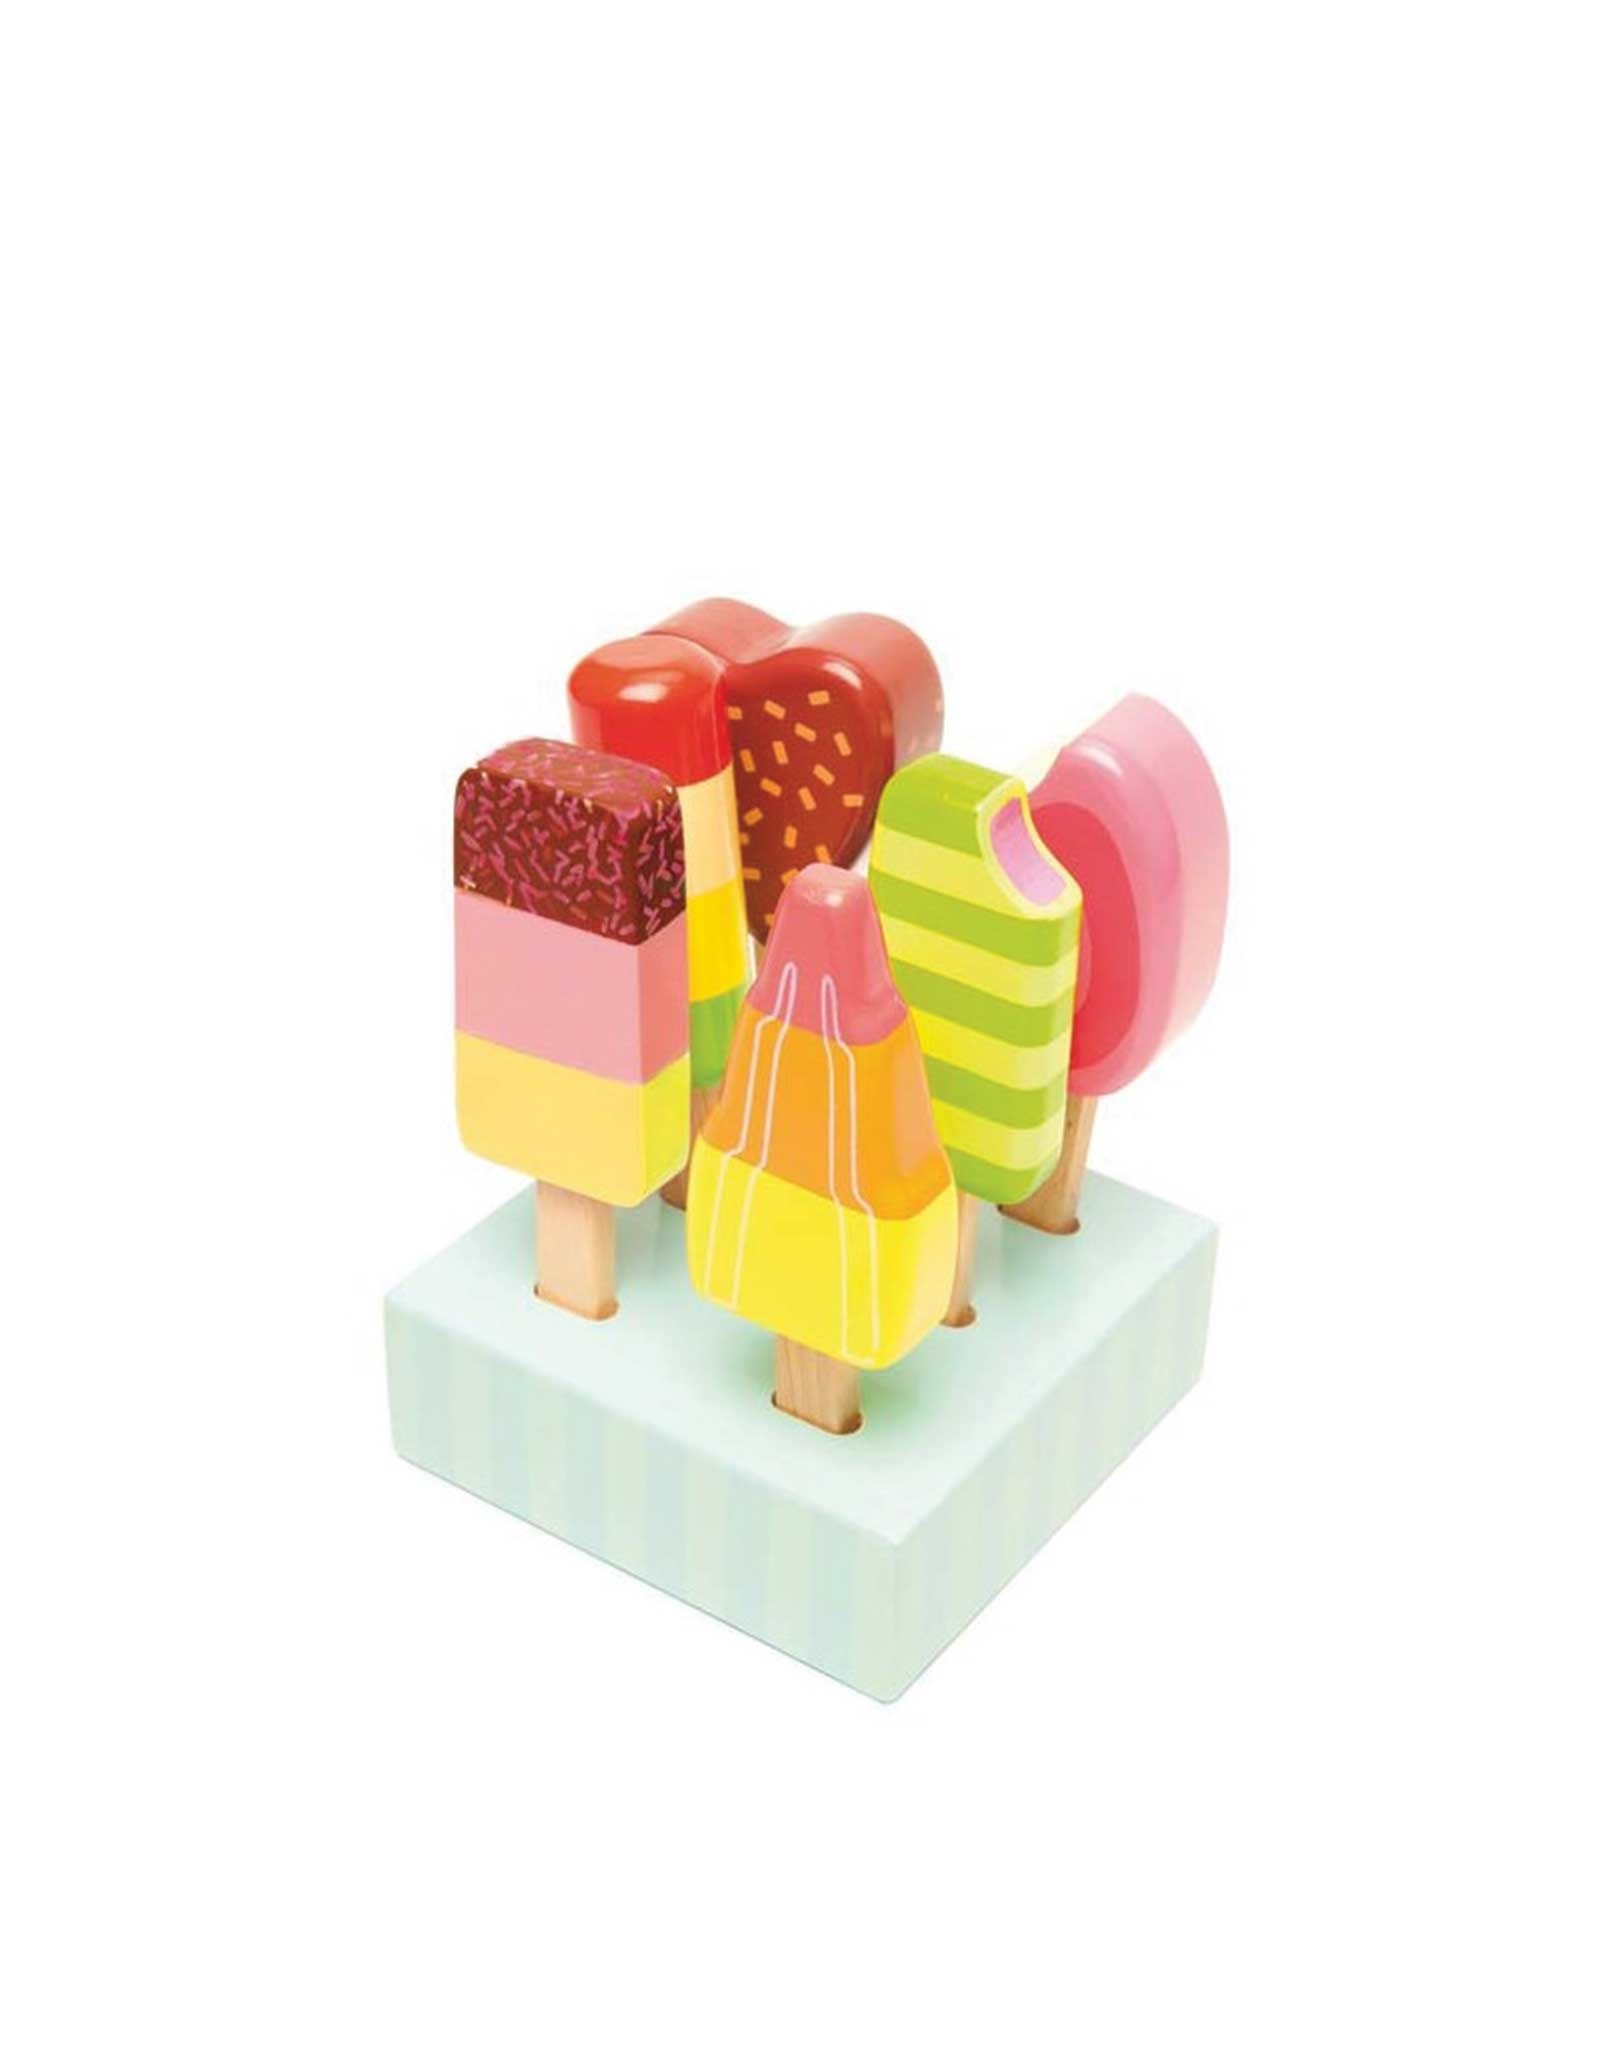 wooden toy ice lollies